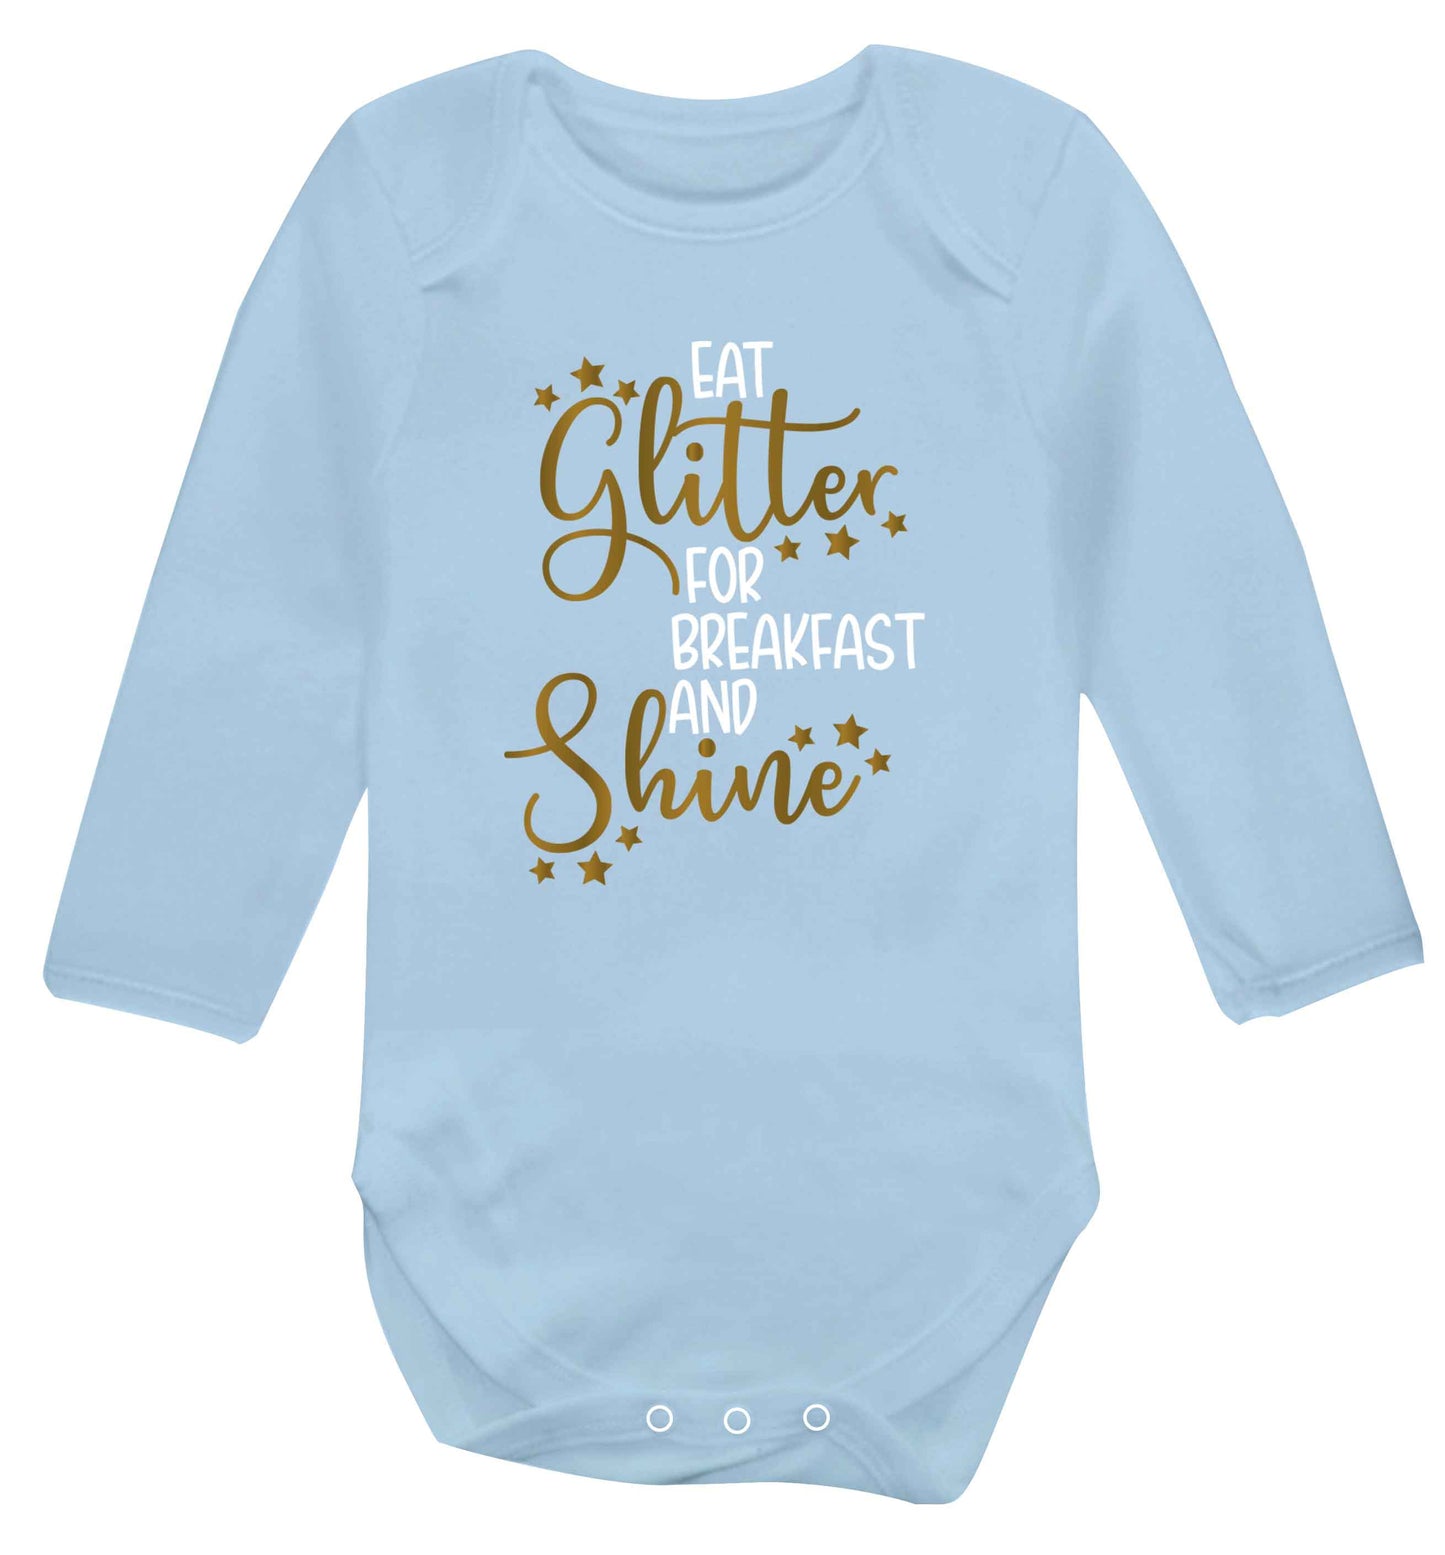 Eat glitter for breakfast and shine all day Baby Vest long sleeved pale blue 6-12 months